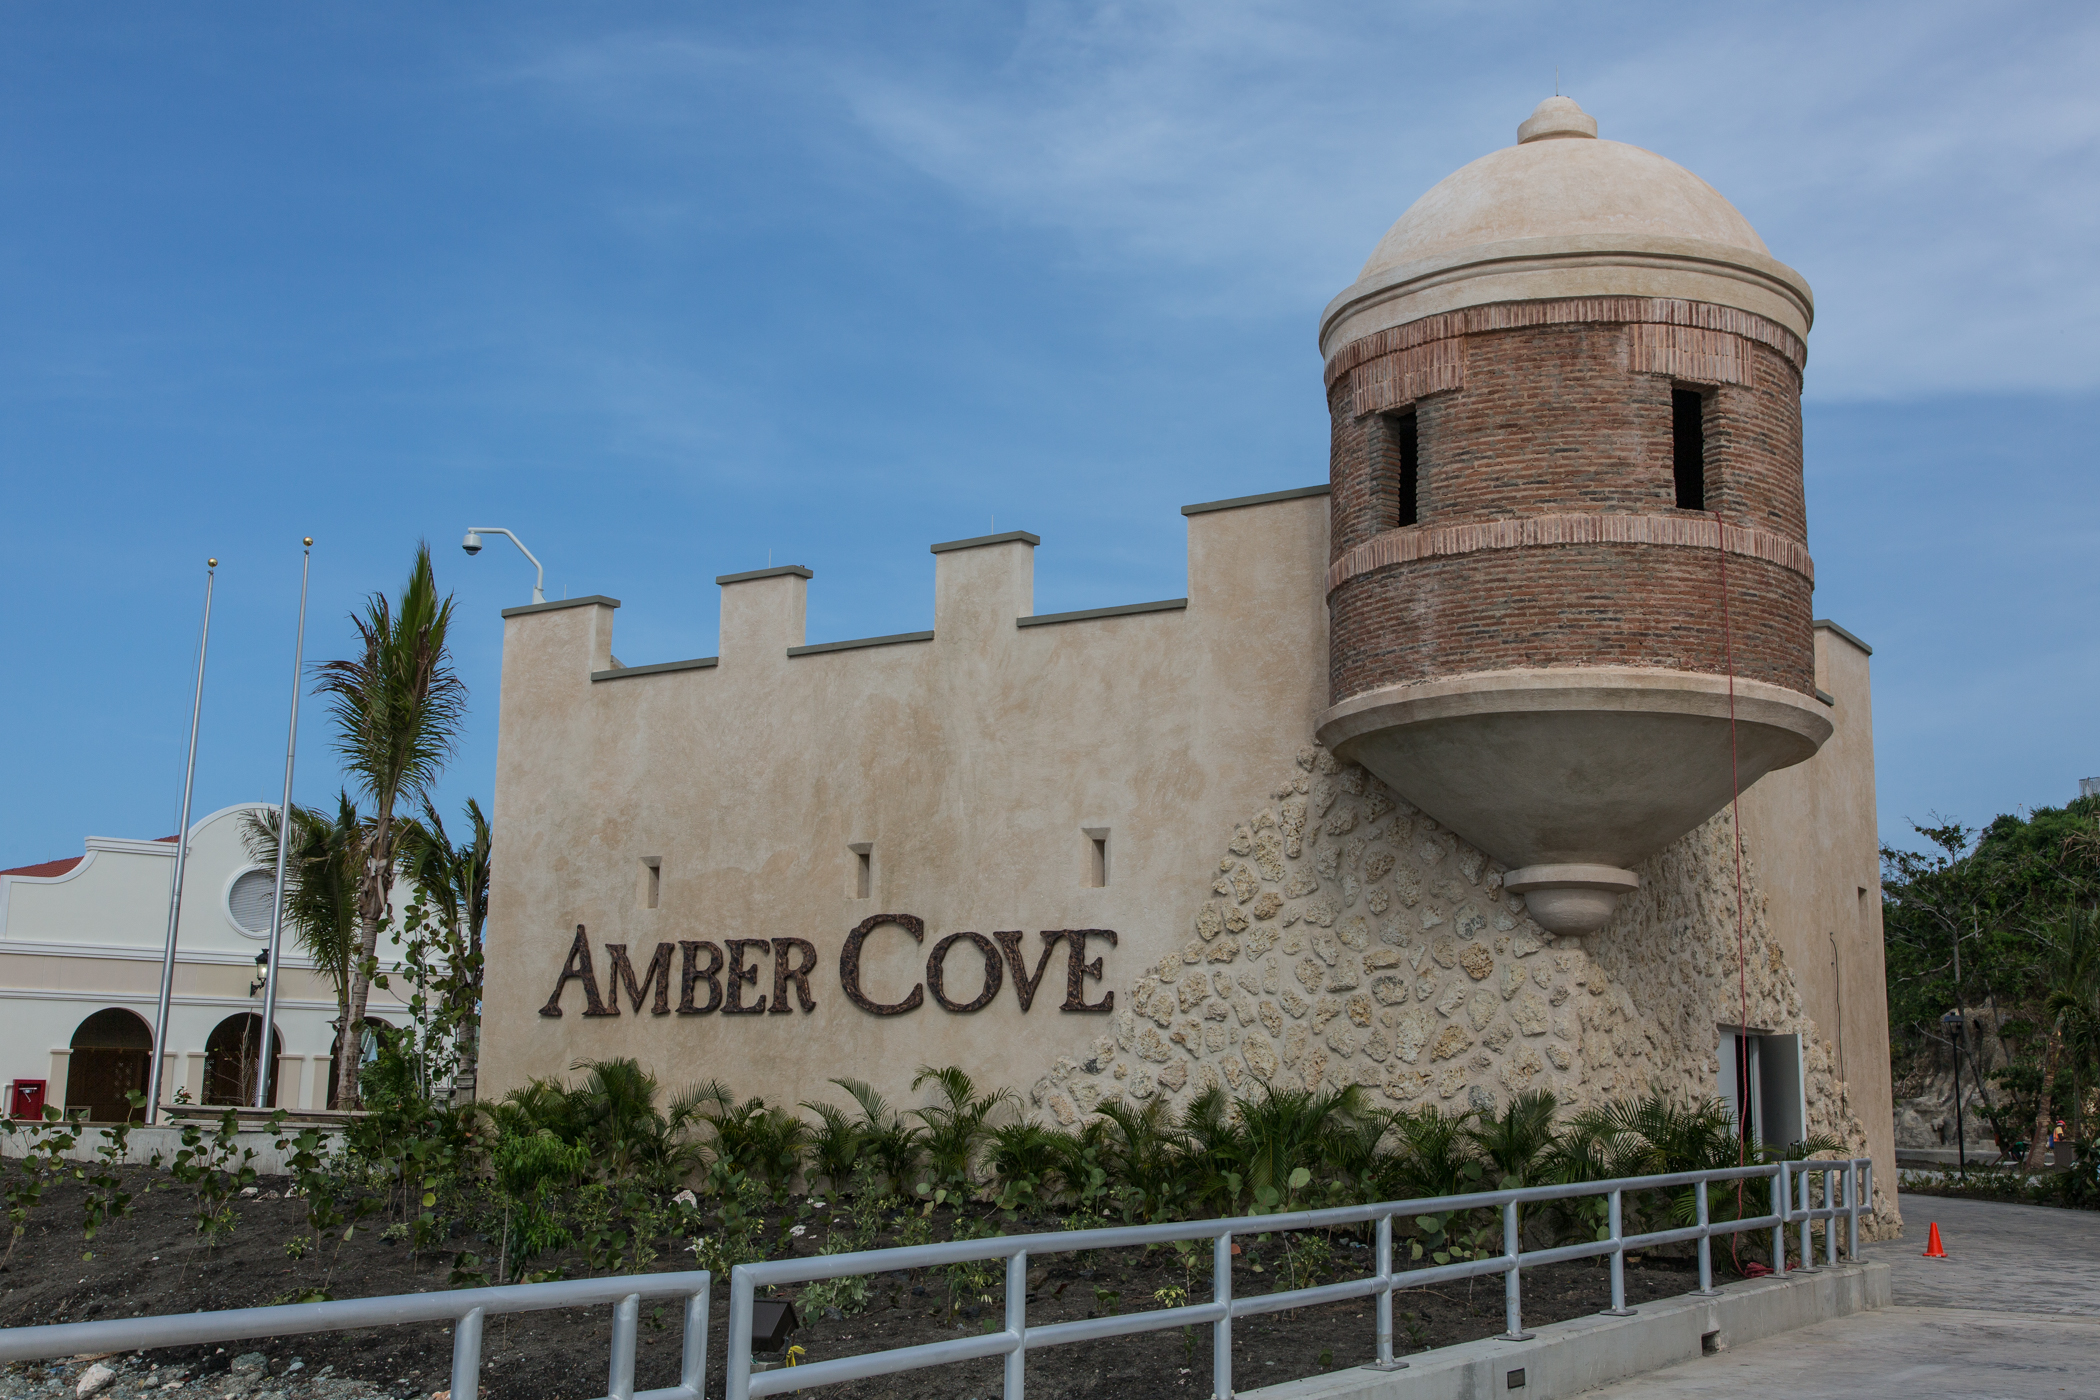 Entrance to the Amber Cove port.